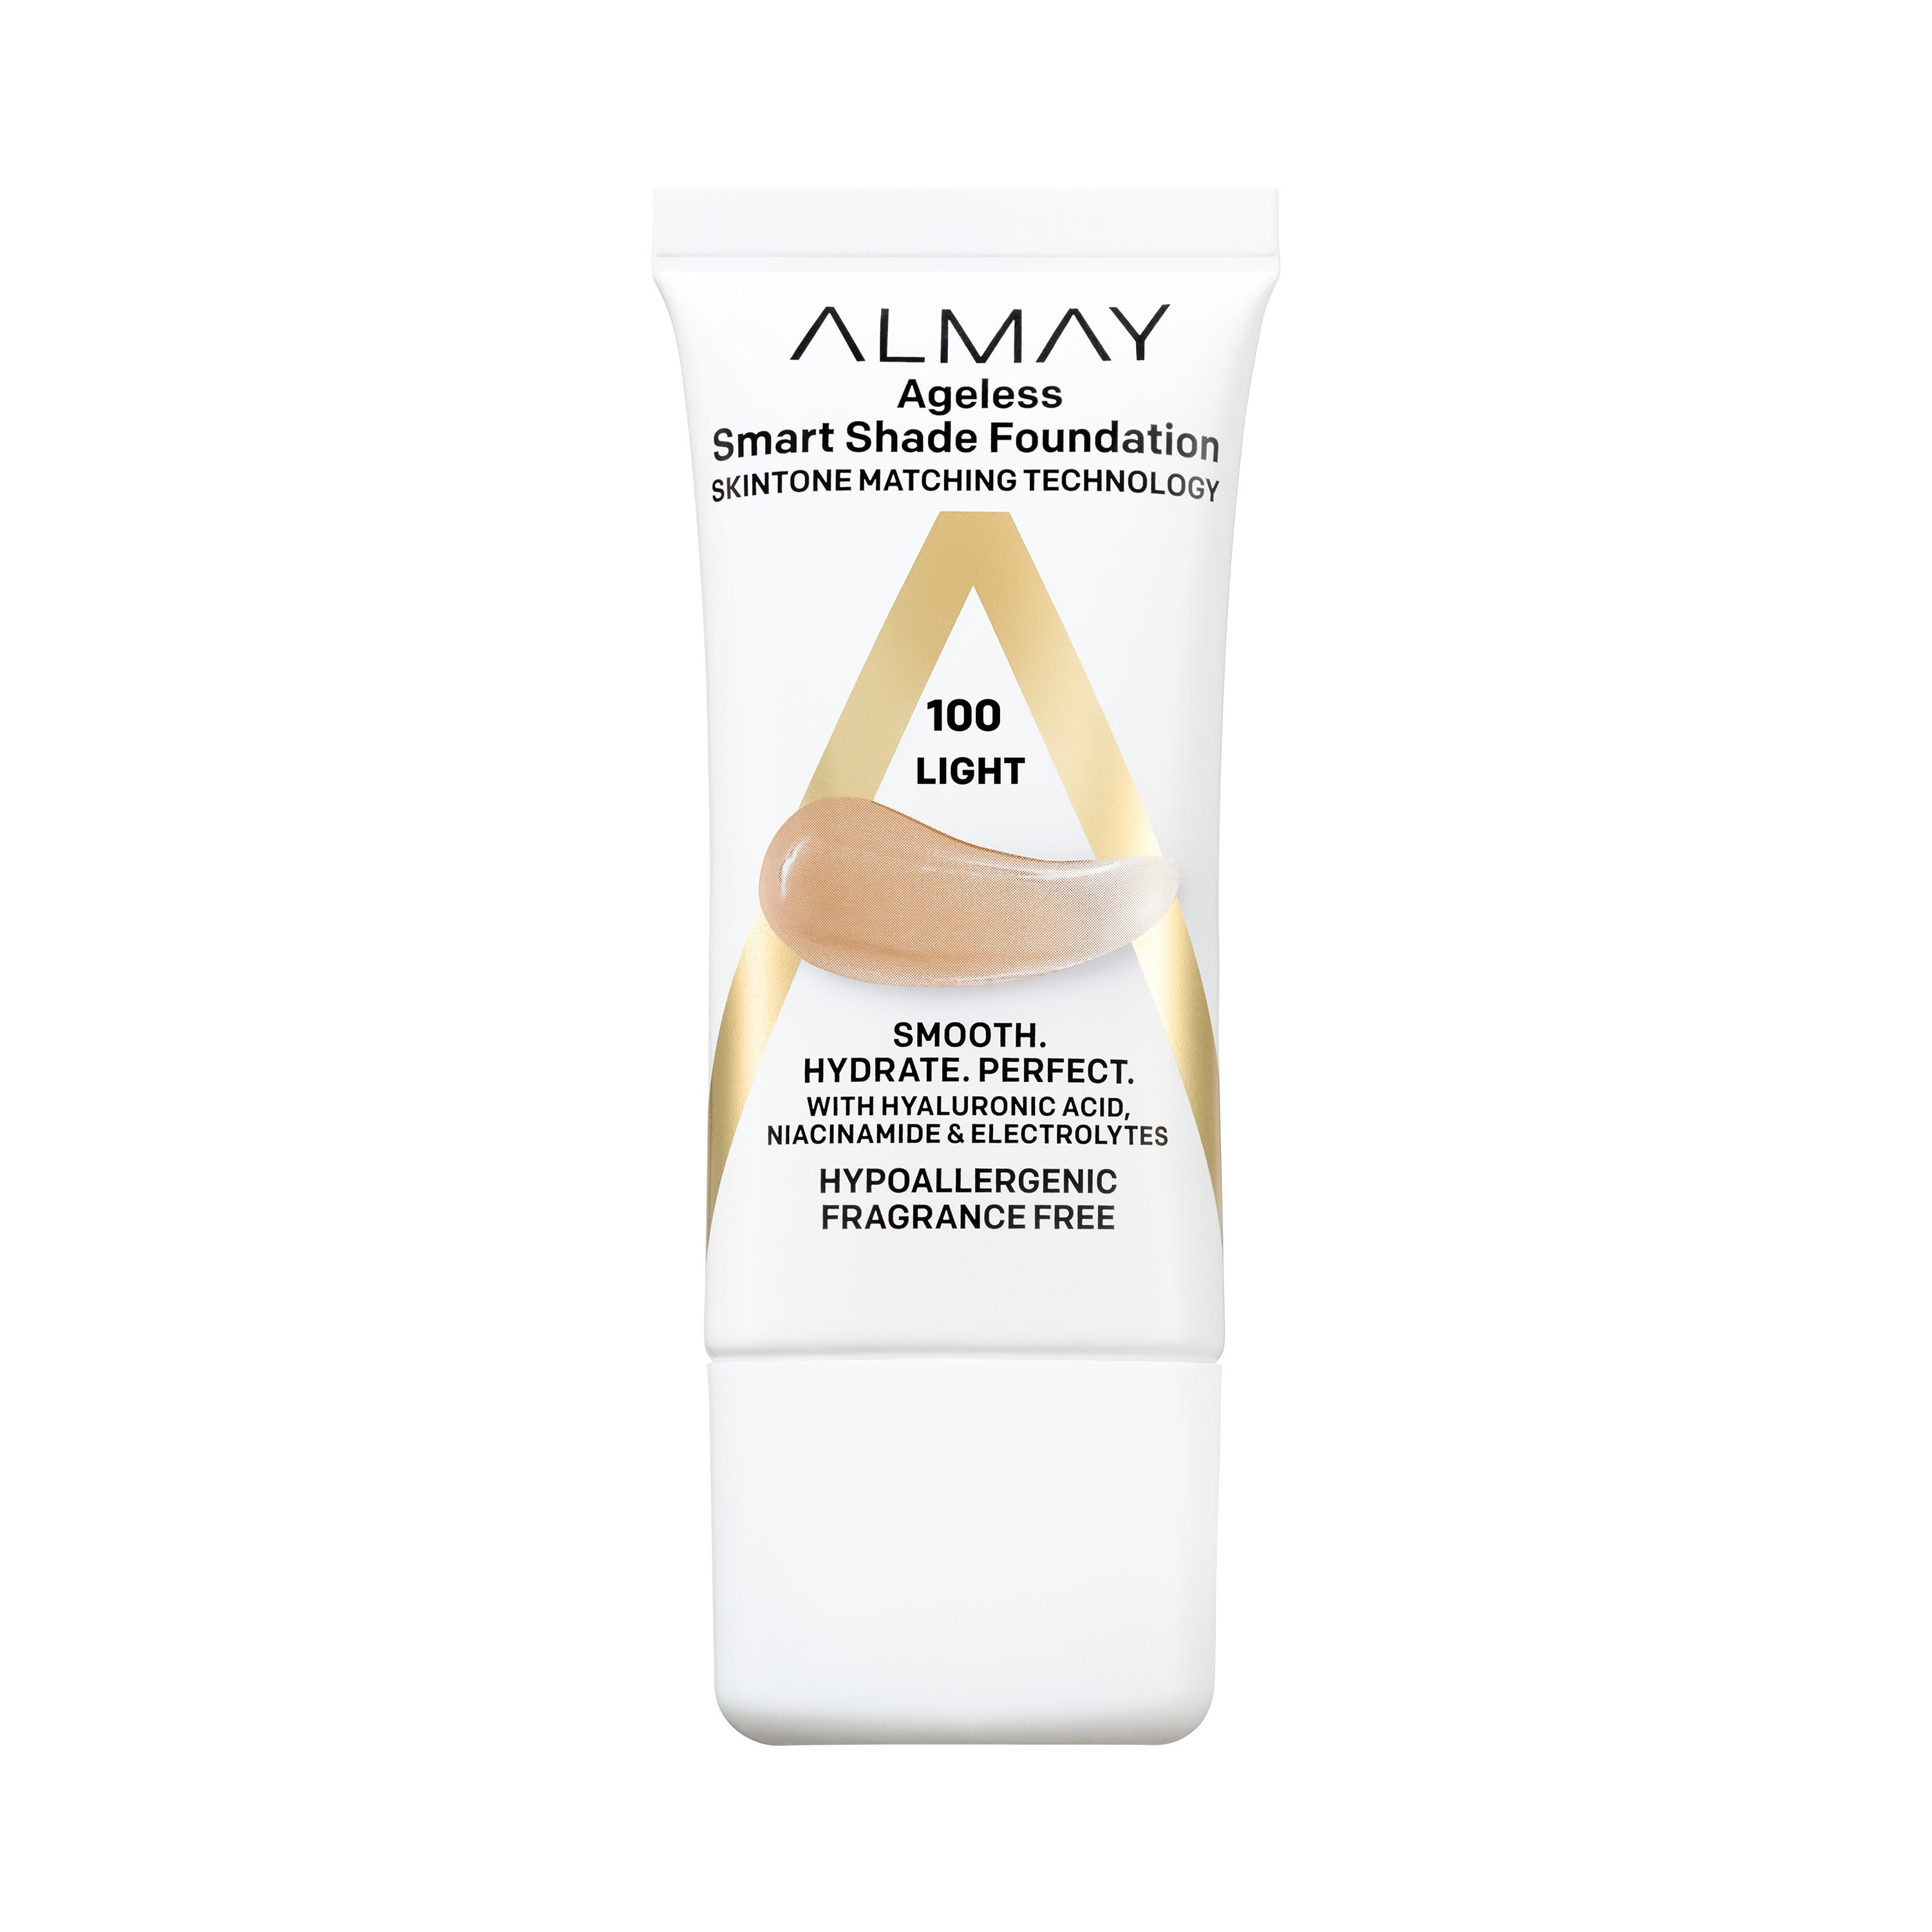 Almay Anti-Aging Foundation by Almay, Smart Shade Face Makeup with Hyaluronic Acid, Niacinamide, Vitamin C & E, Hypoallergenic, Fragrance Free, 100 Light, 1 Fl Oz, 100 Light, 1 fl oz.